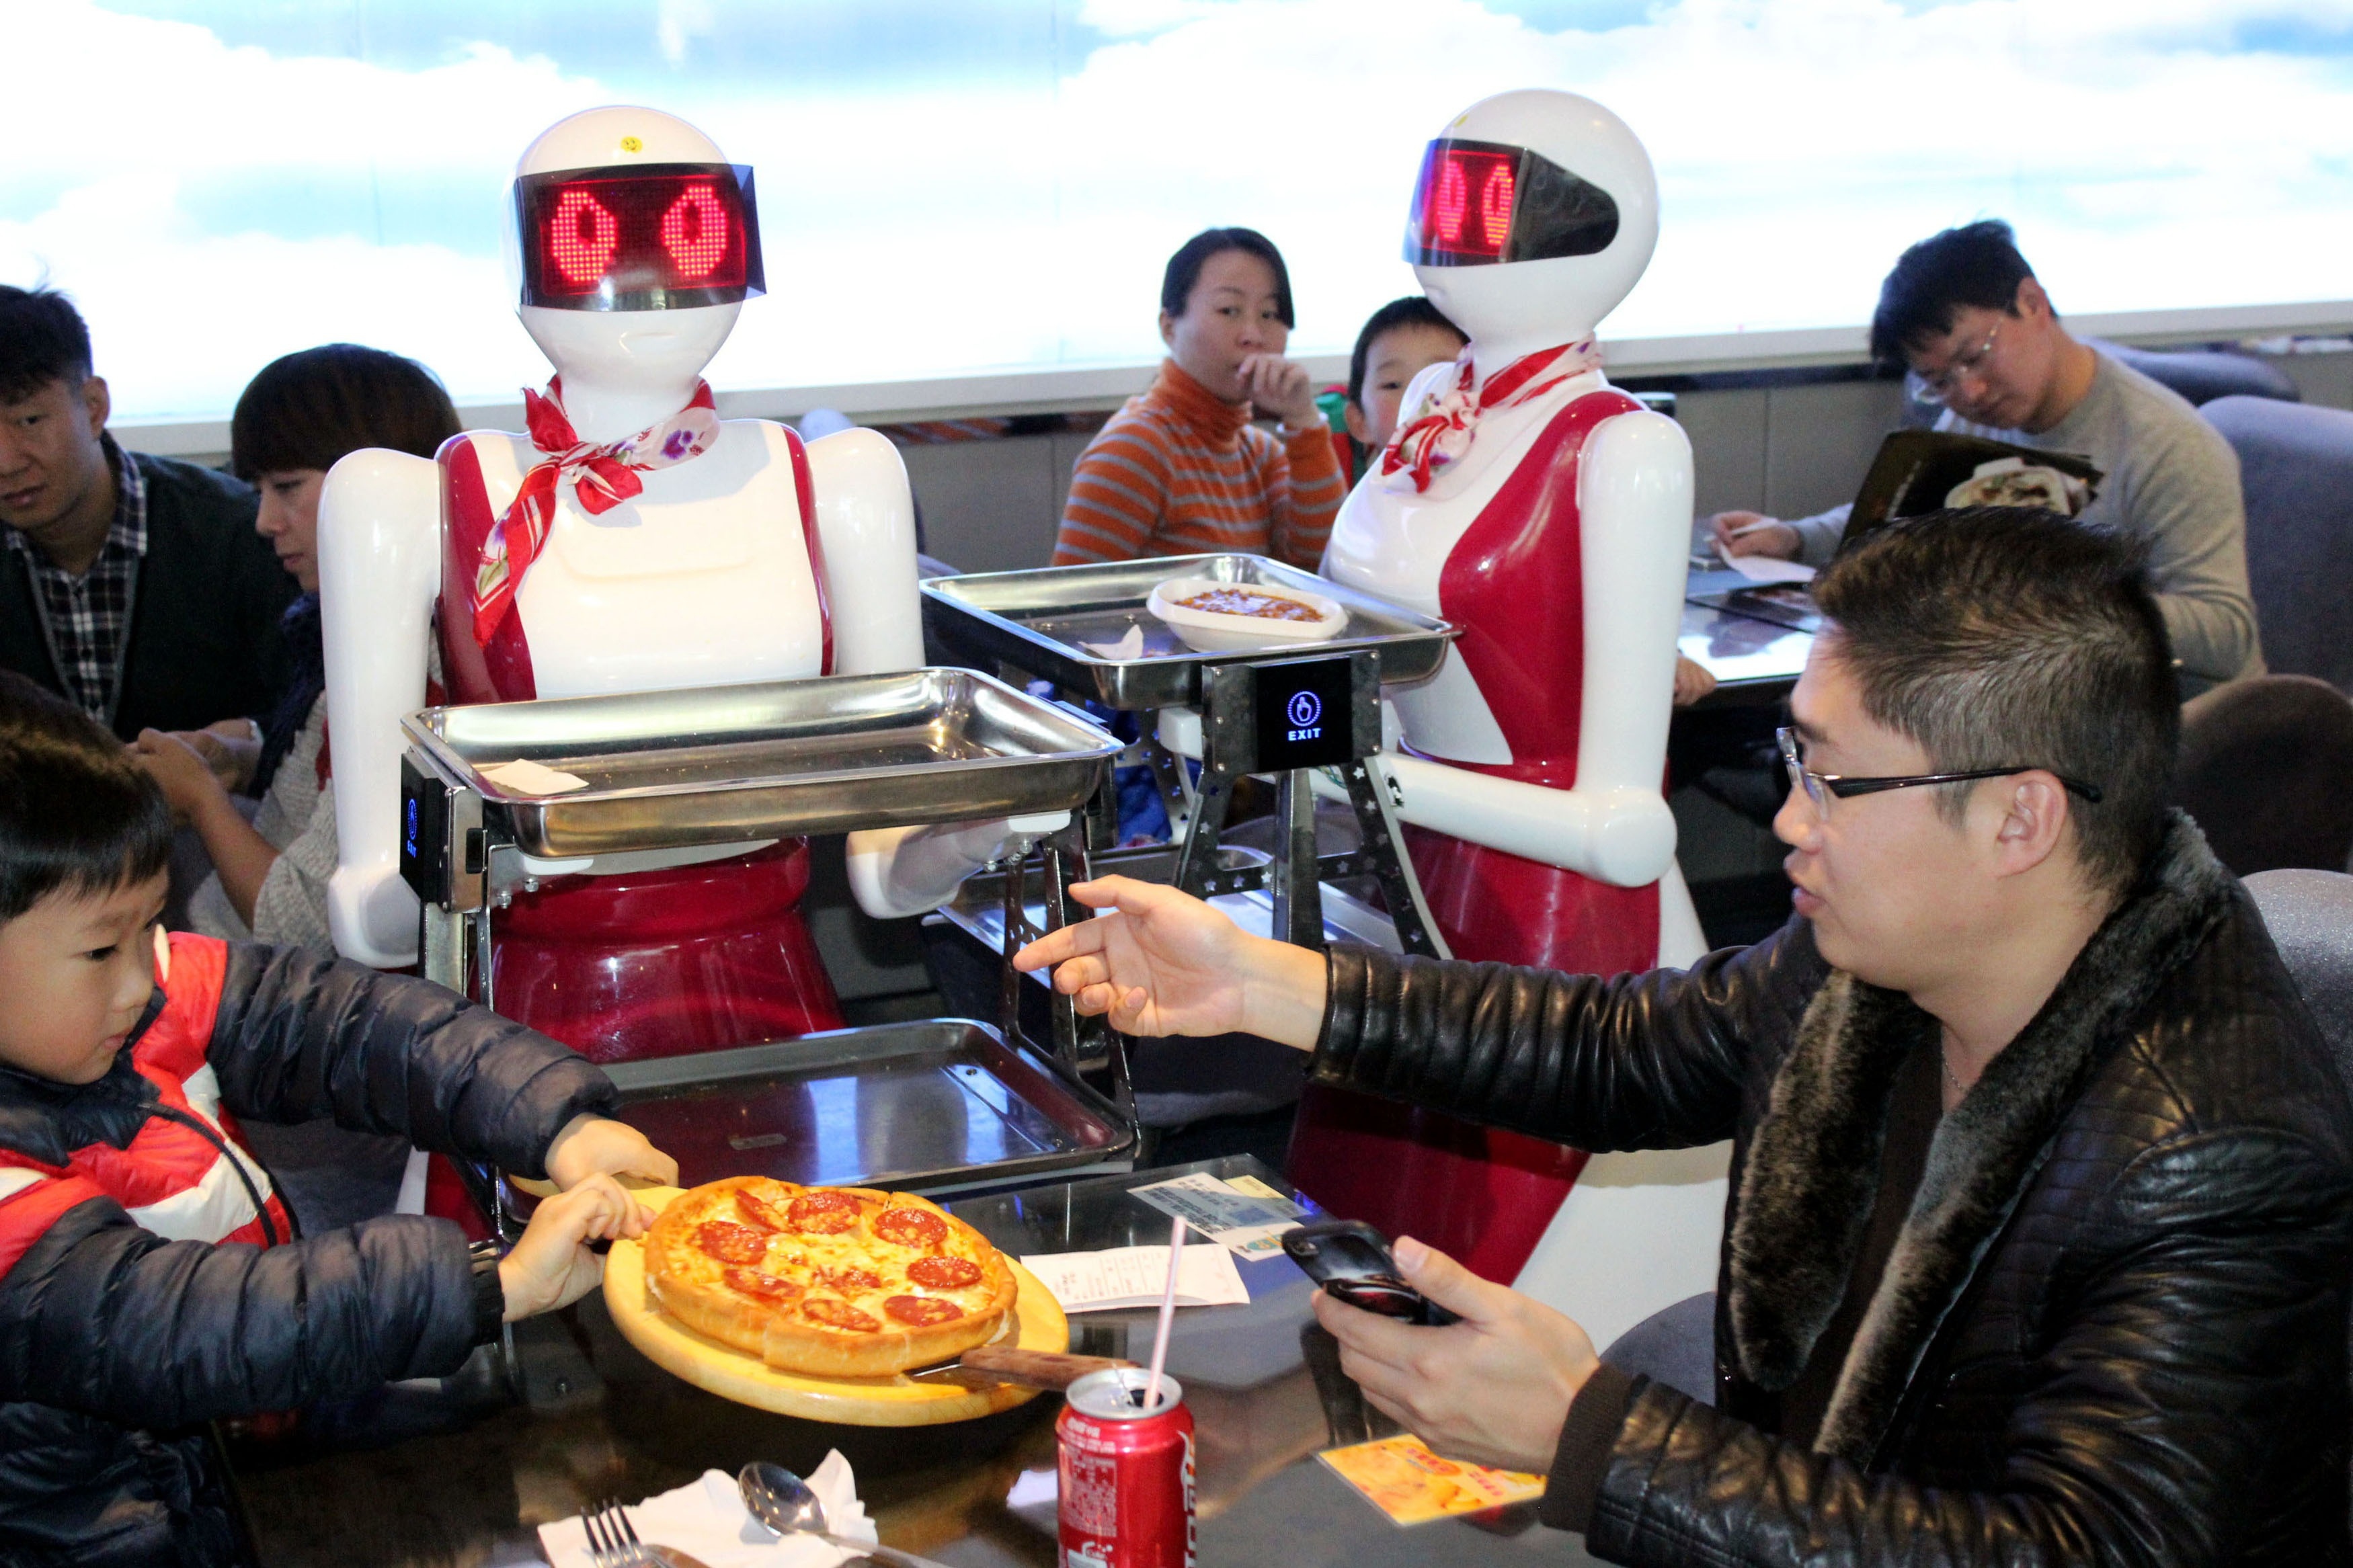 Robots serving food at a restaurant in China